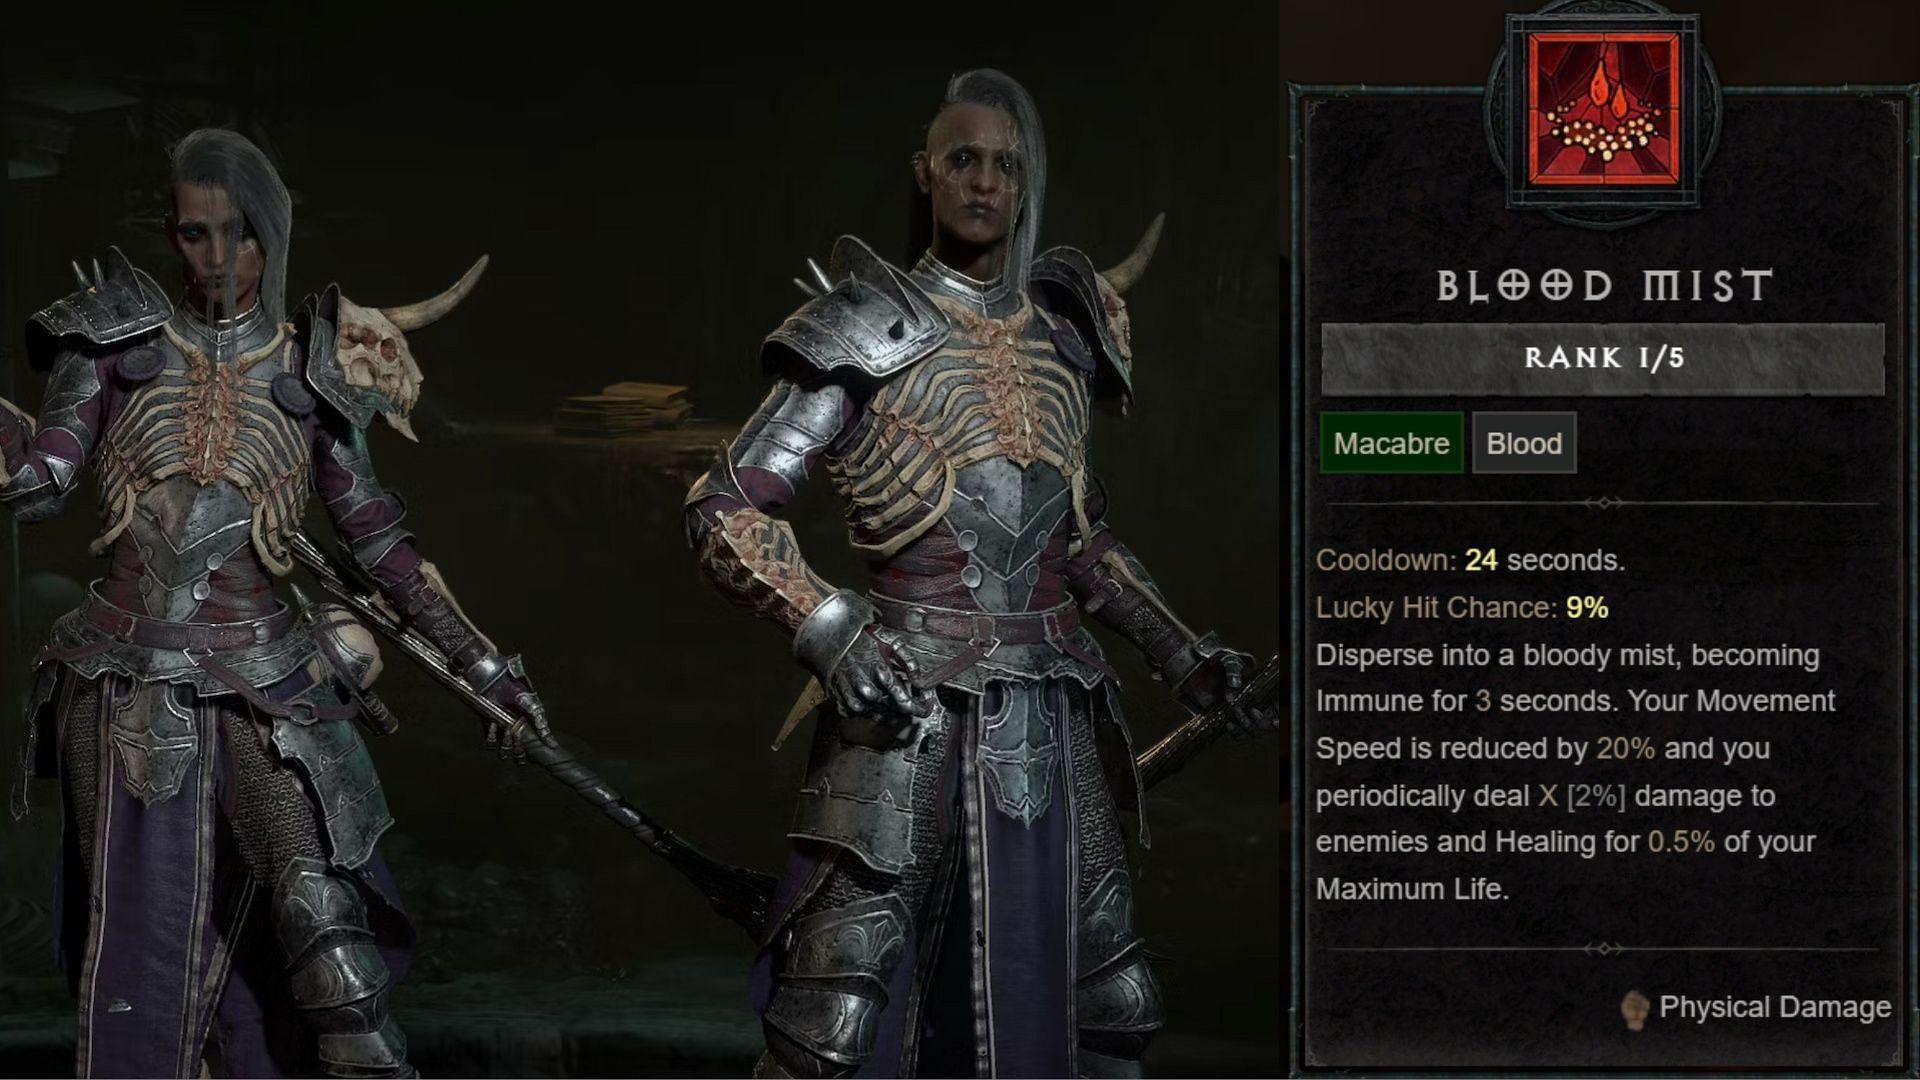 Two Necromancers on the left and Blood Mist Diablo 4 skill description on the right. 